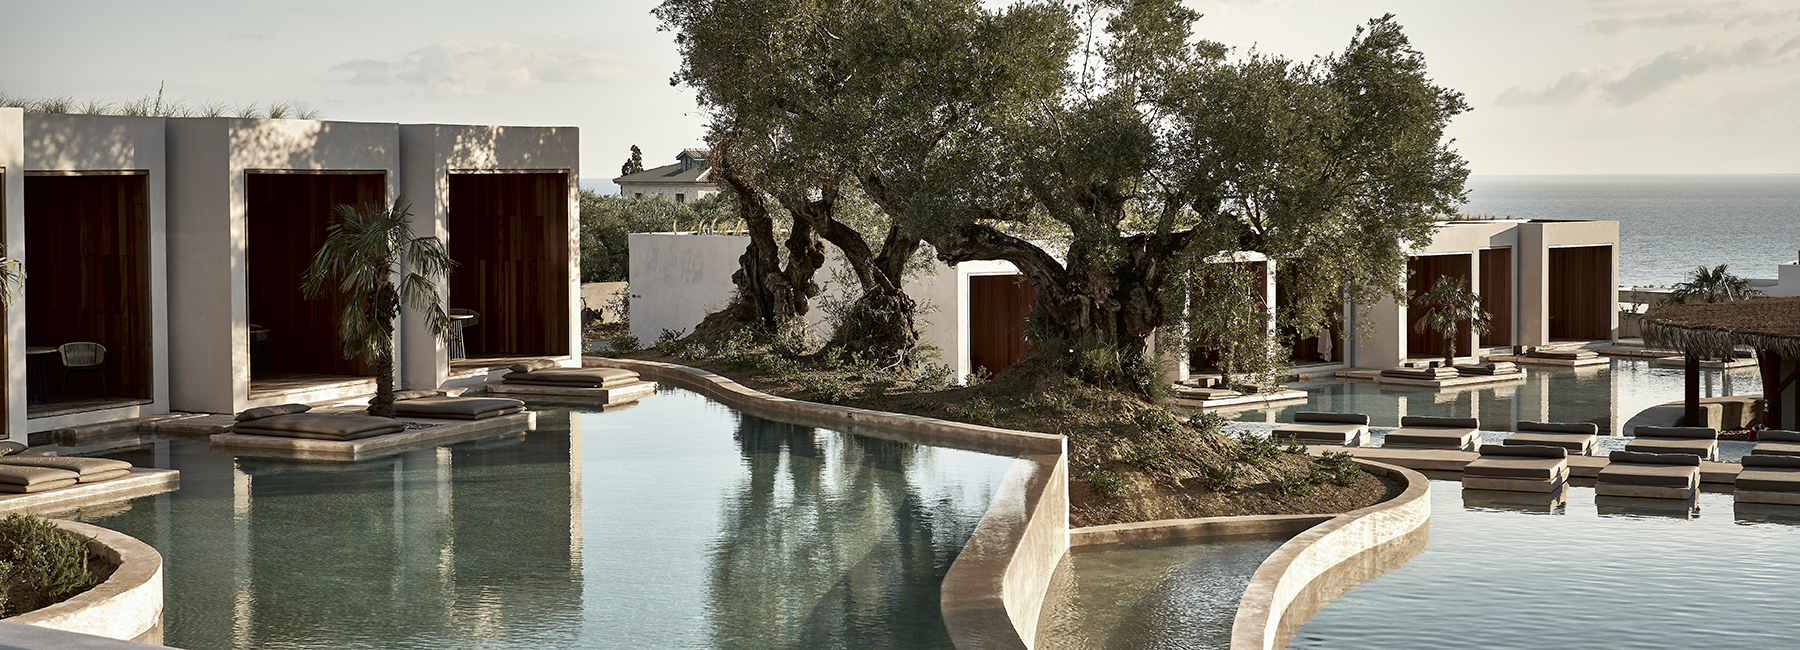 a hotel in greece by block722 surrounds a serene, man-made lake